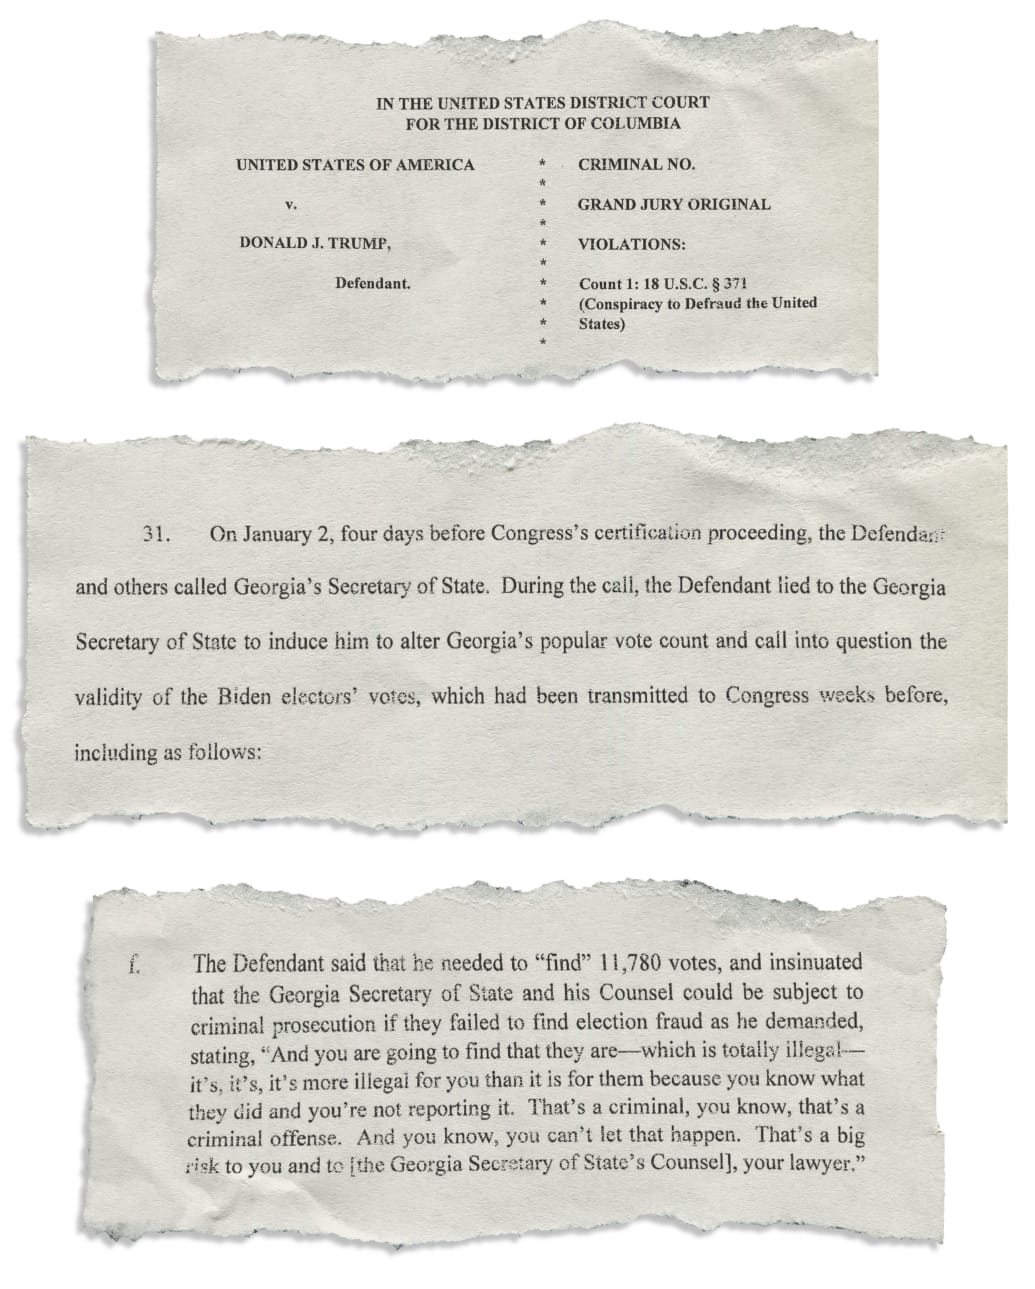 Tear-sheet of snippets of the Jack Smith Federal indictment against President Trump